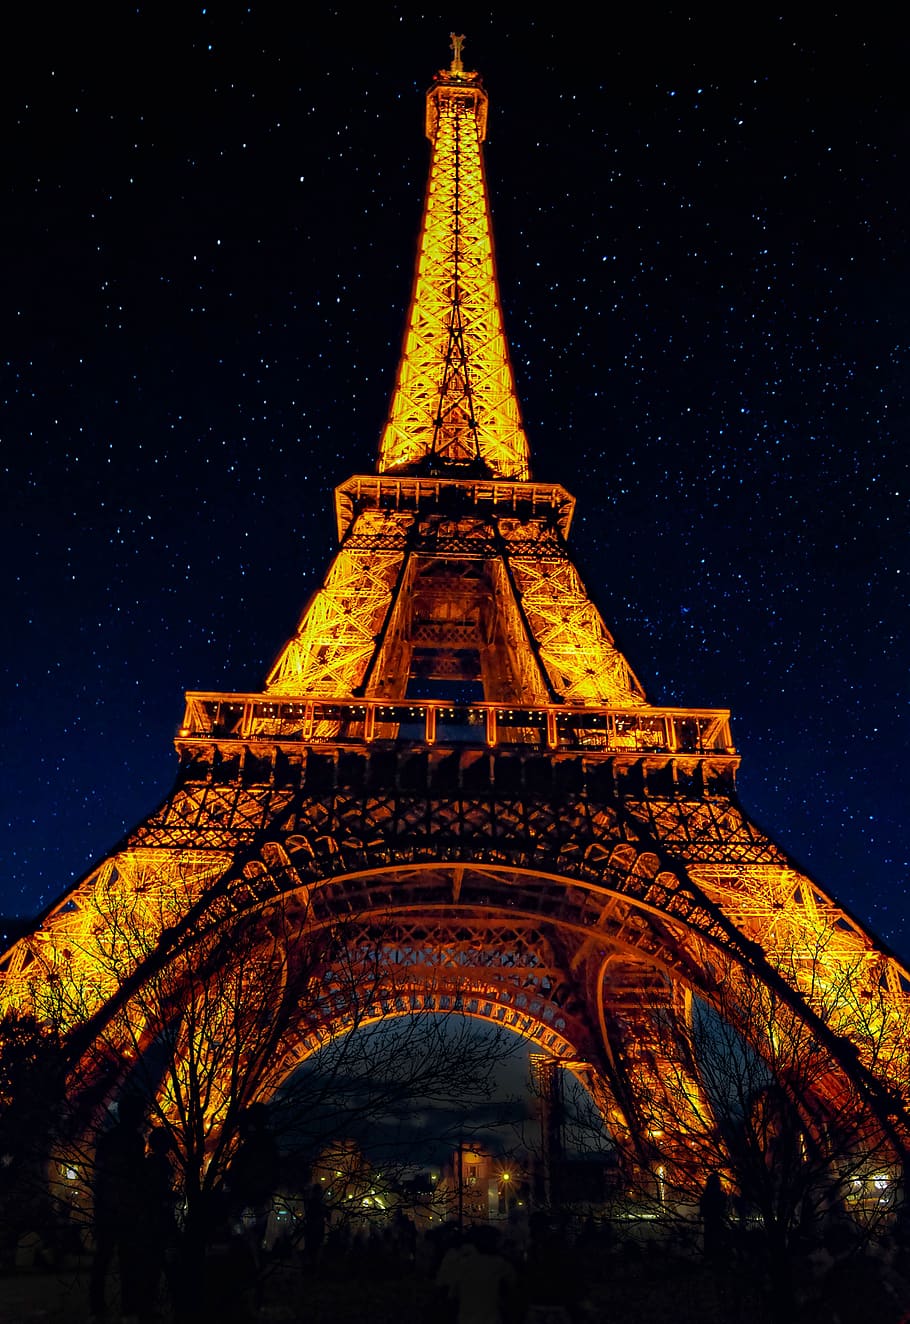 tower, eiffel tower, paris, france, architecture, europe, city, night, tall, historical